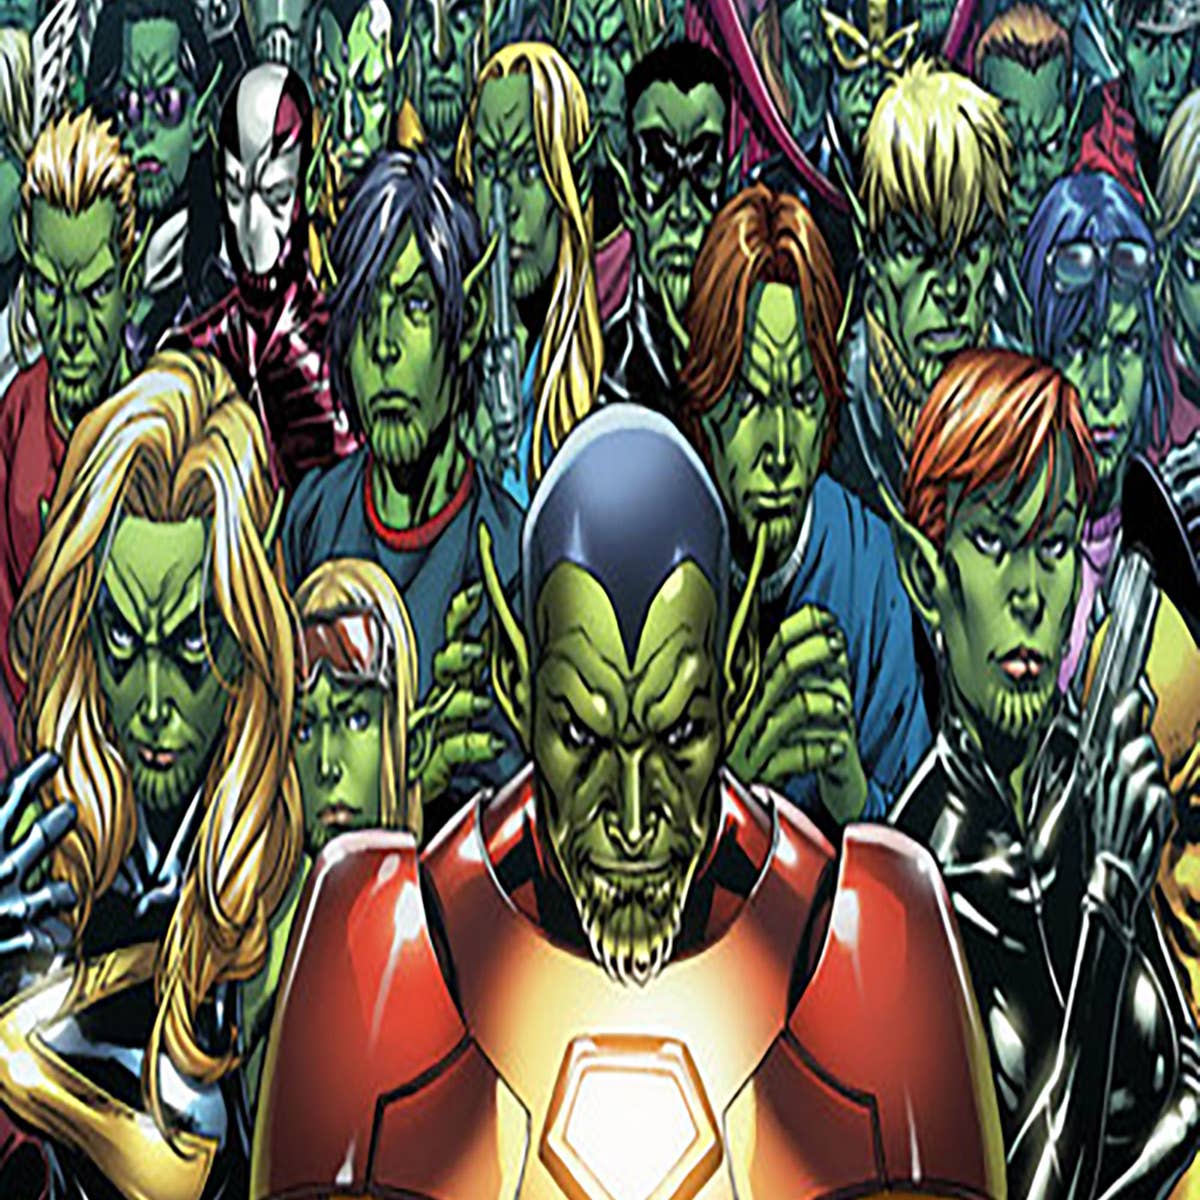 Secret Invasion's Trailer Reveals the Absence of The Avengers